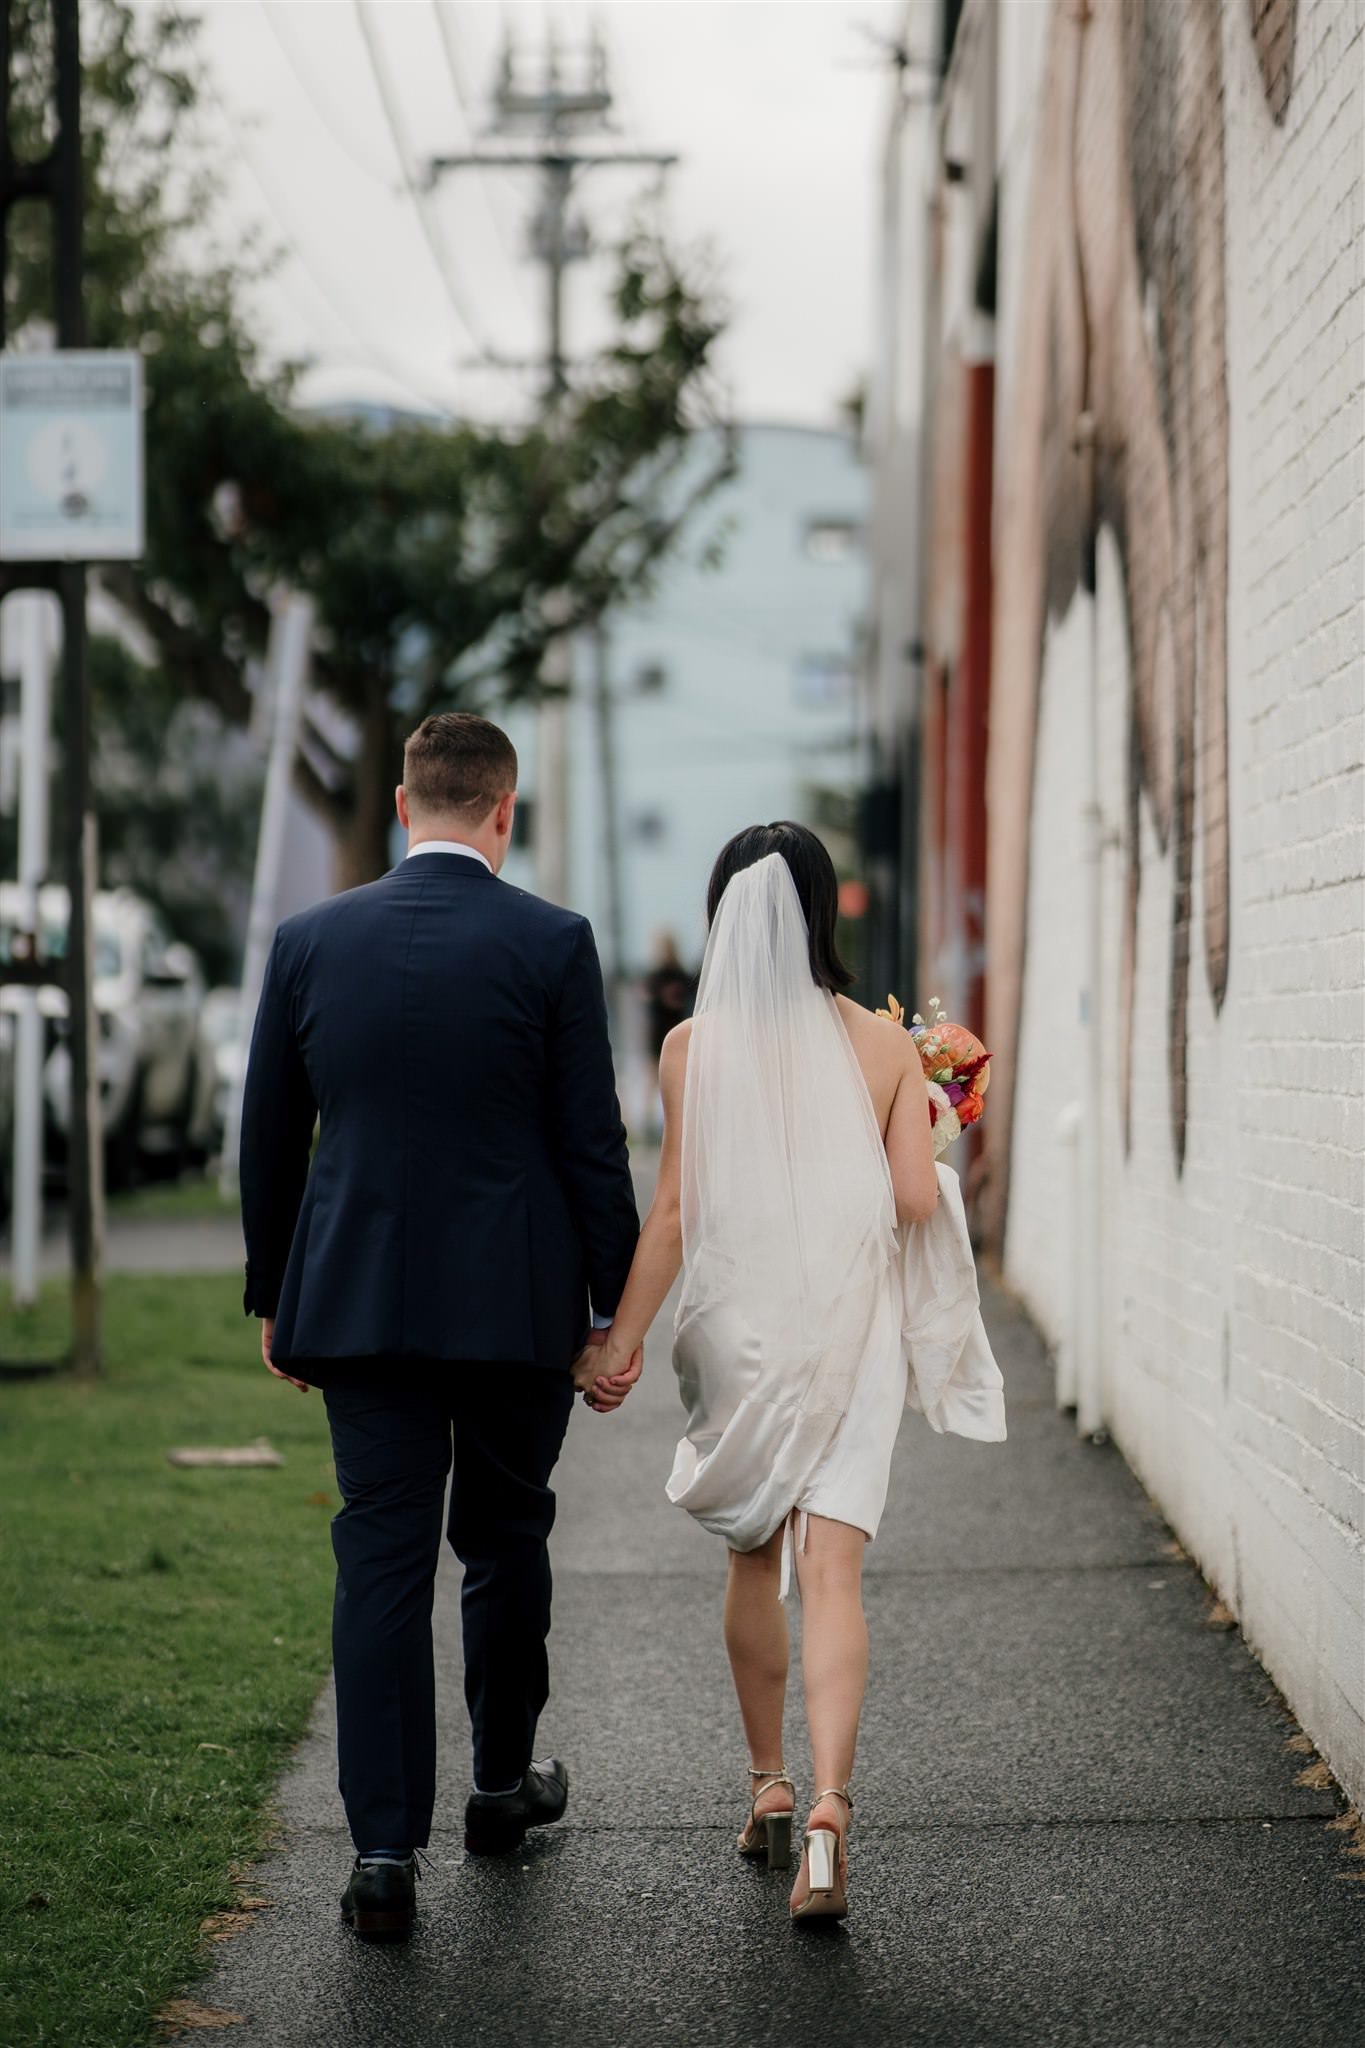 glasshouse-morningside-urban-best-auckland-wedding-venue-central-indoor-photographer-videographer-dear-white-productions-top-industrial-chinese-ceremony-tradition (111).jpg